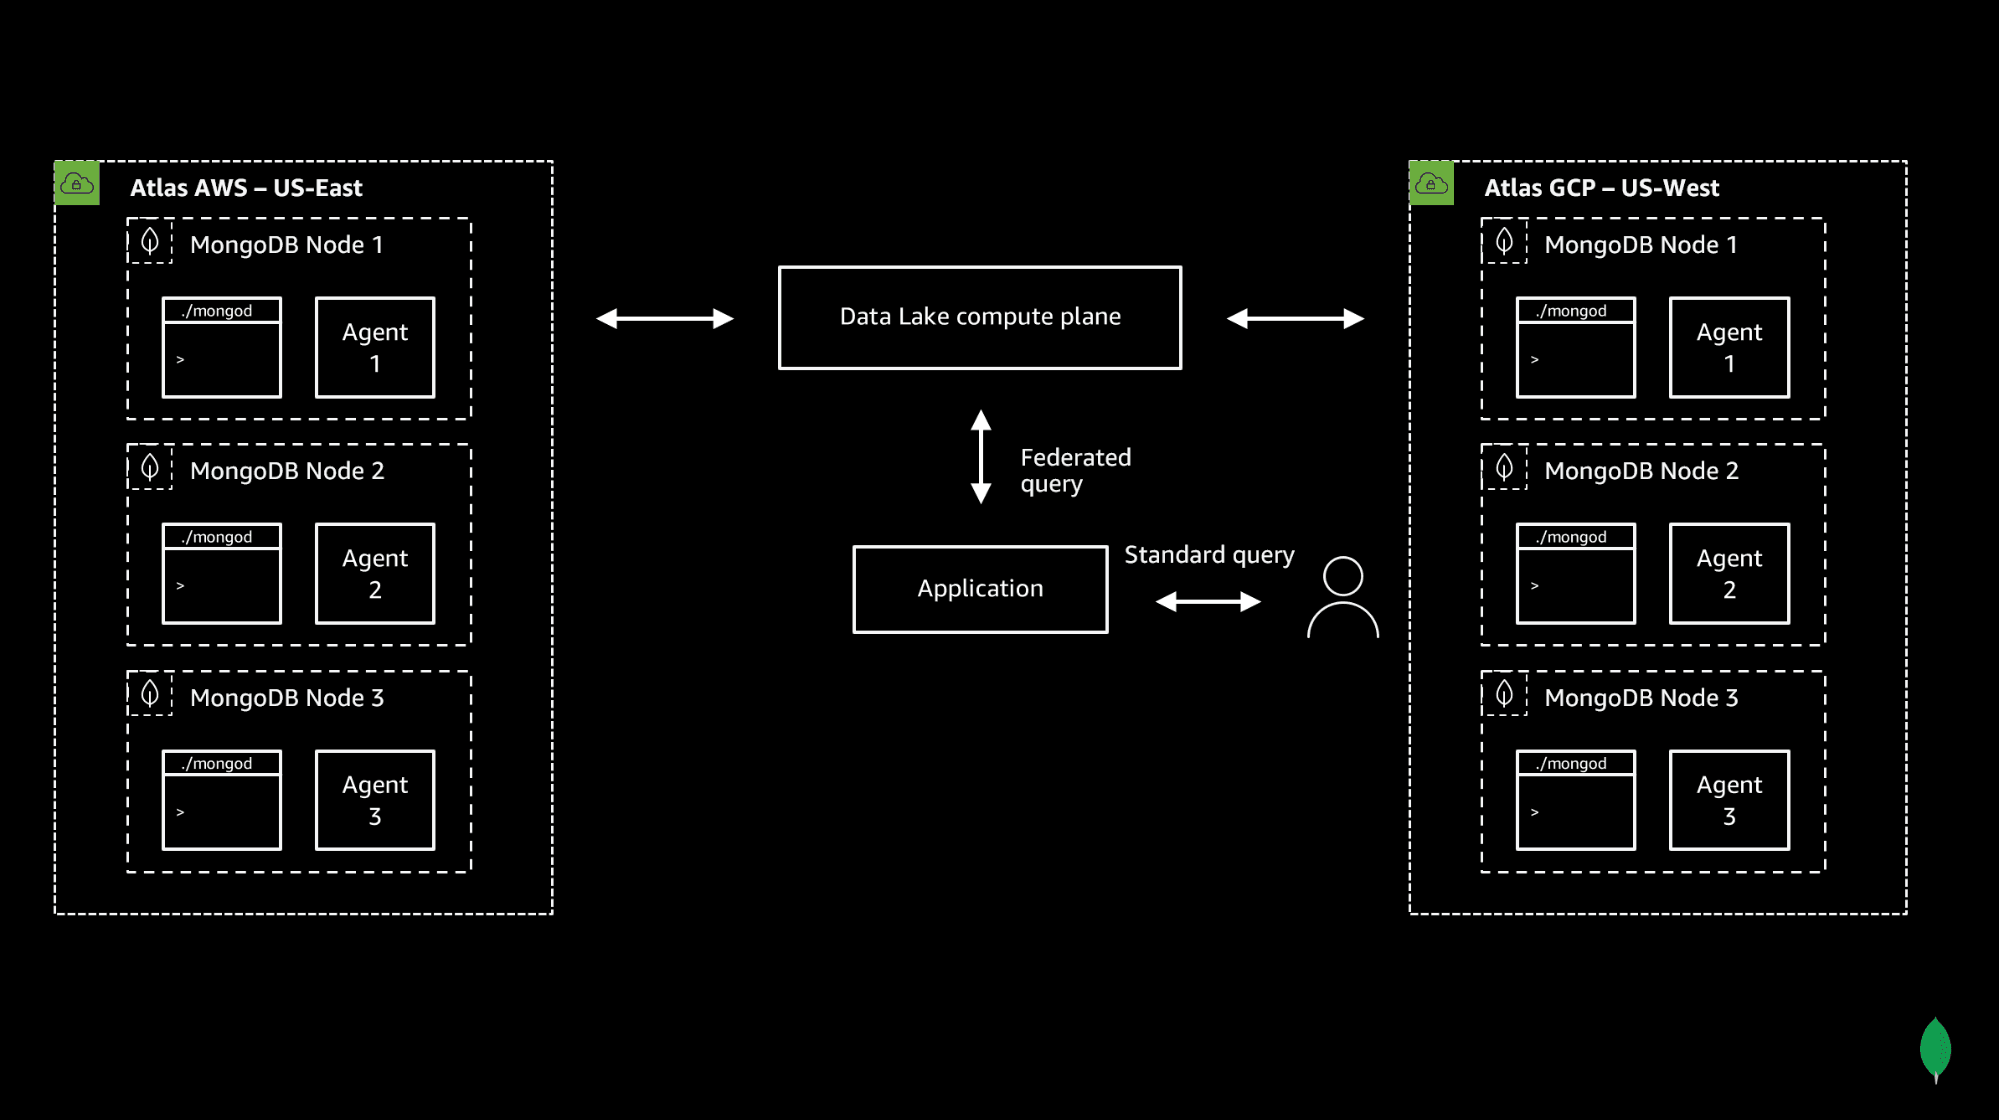 Diagram showing how MongoDB Atlas Data Lake uses a compute plane to distribute and perform queries across multiple MongoDB Databases.